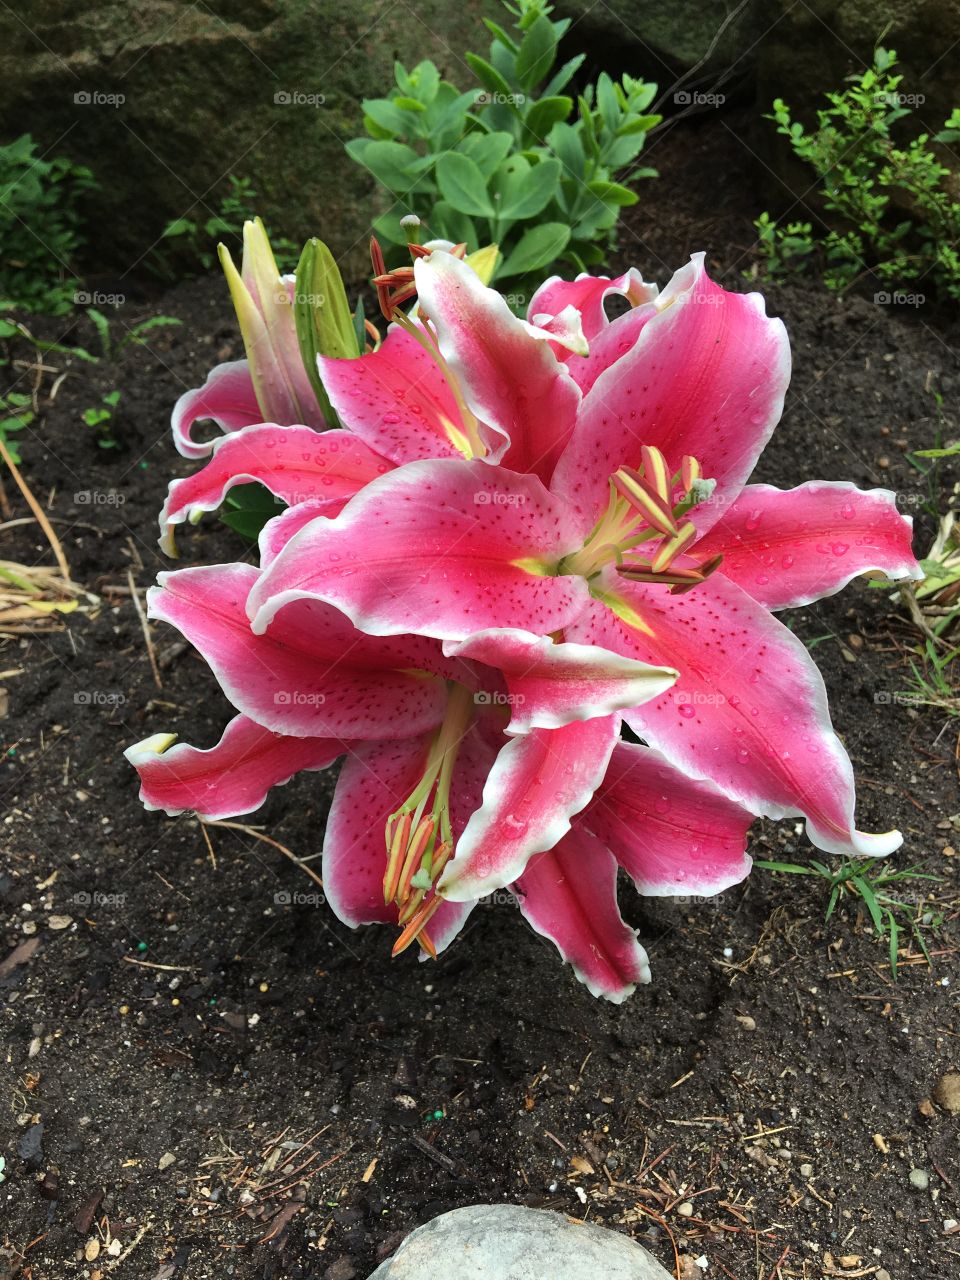 Lily is in my garden